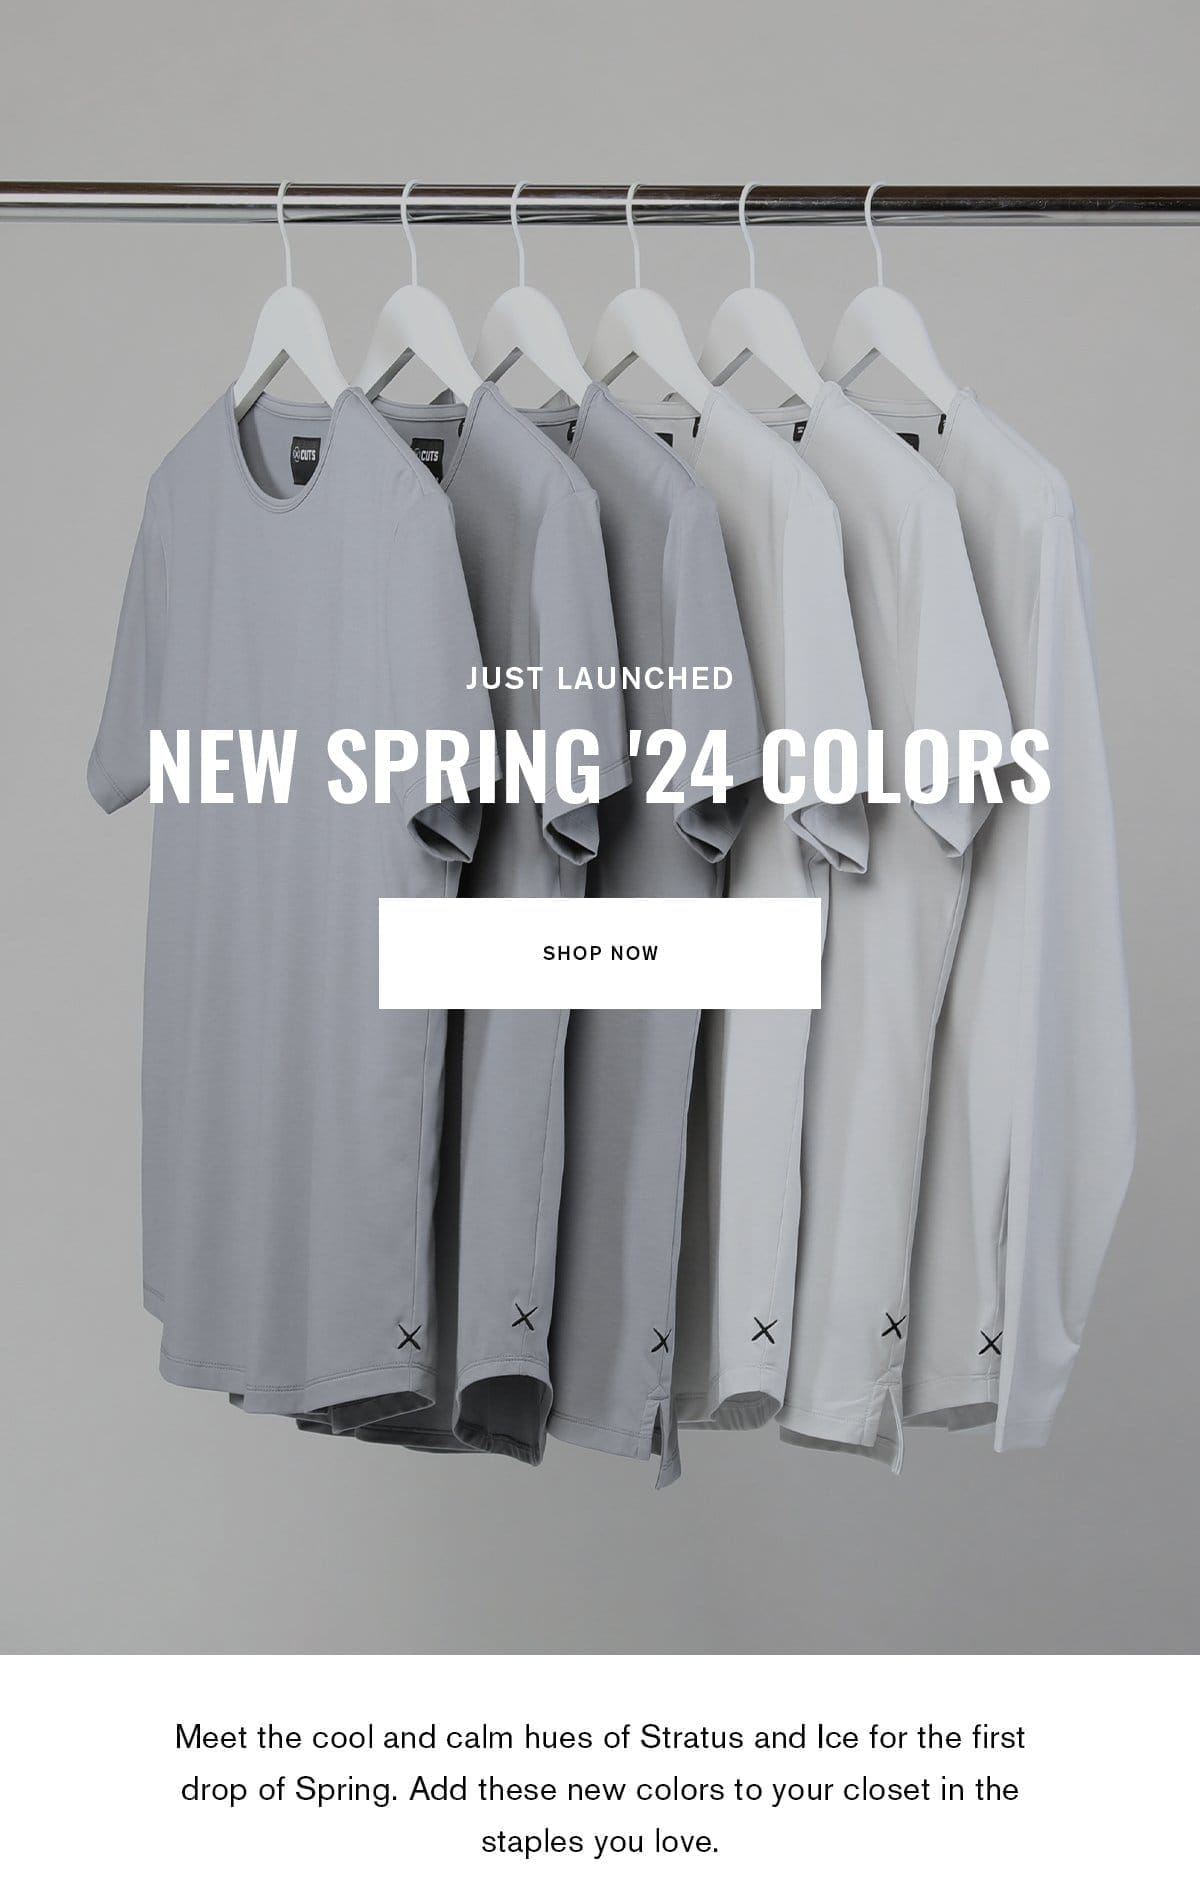 NEW SPRING '24 COLORS